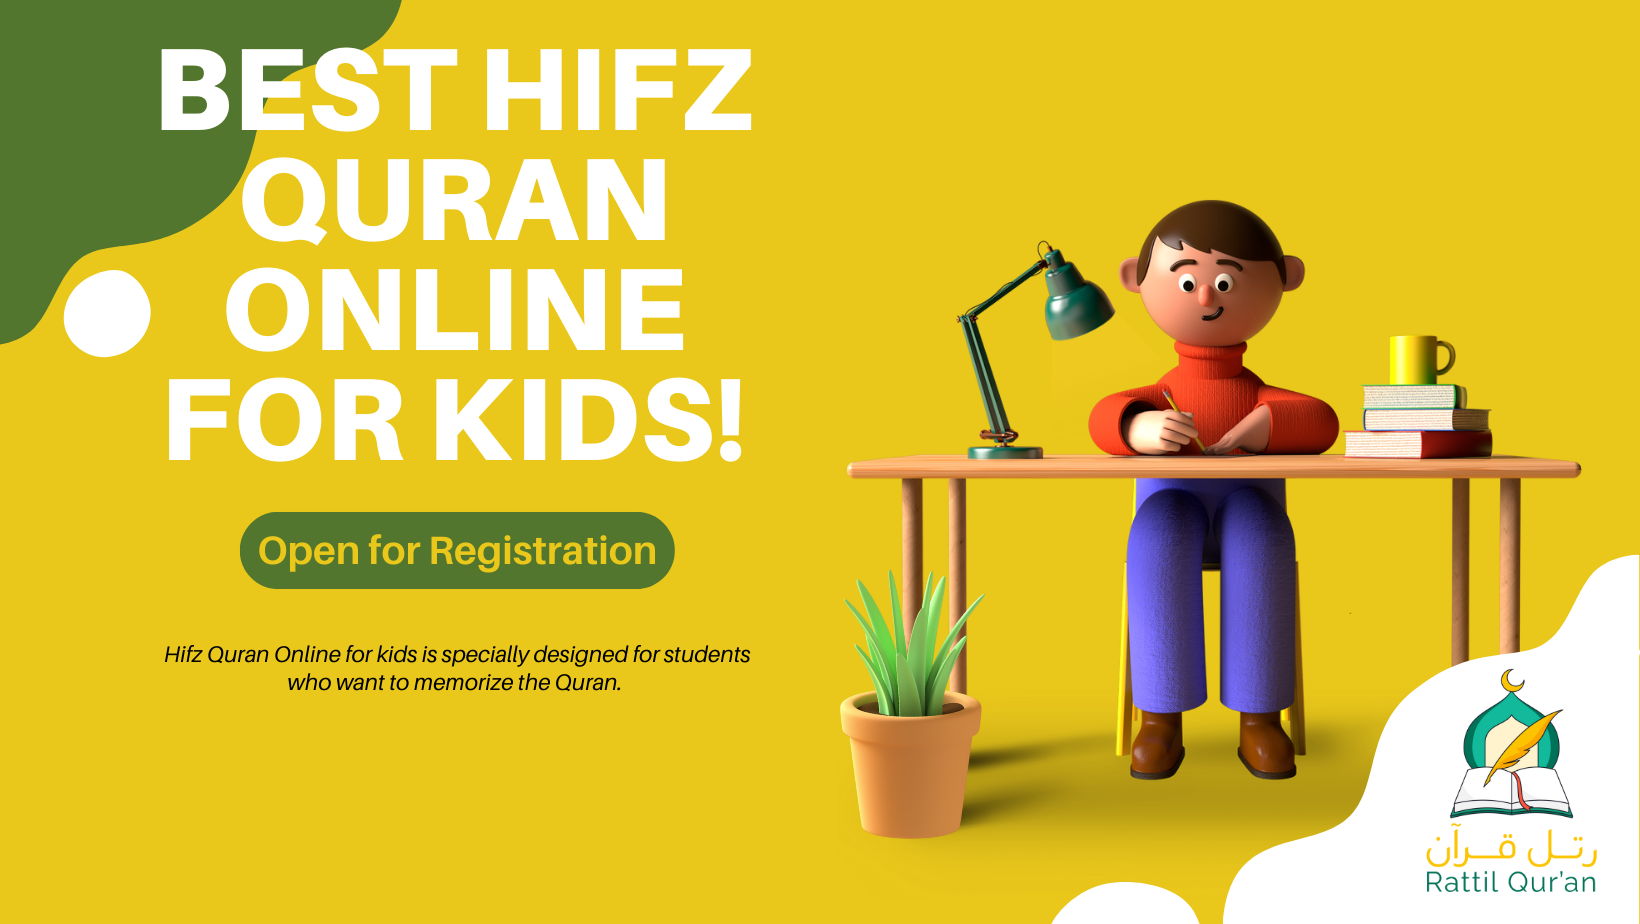 You are currently viewing Best Hifz Quran Online for kids!